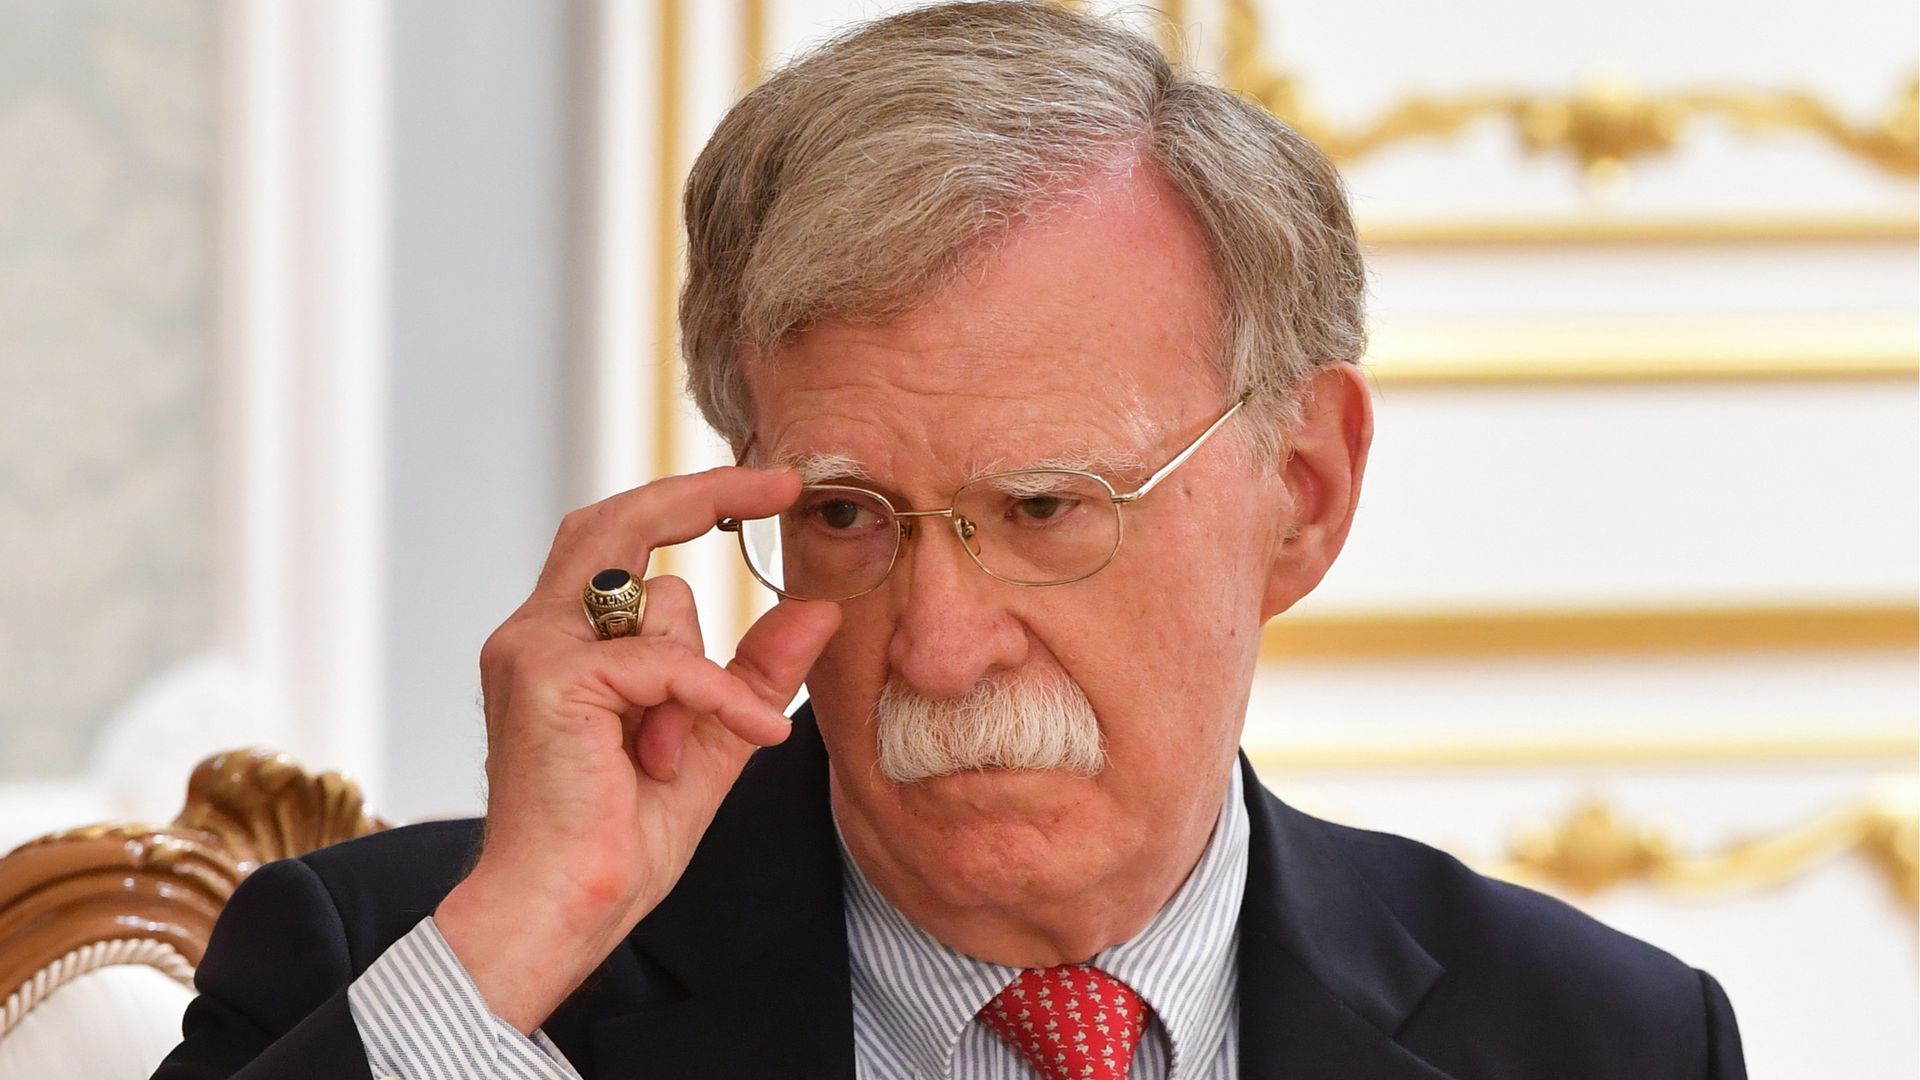 Then-national security advisor John Bolton during a meeting.